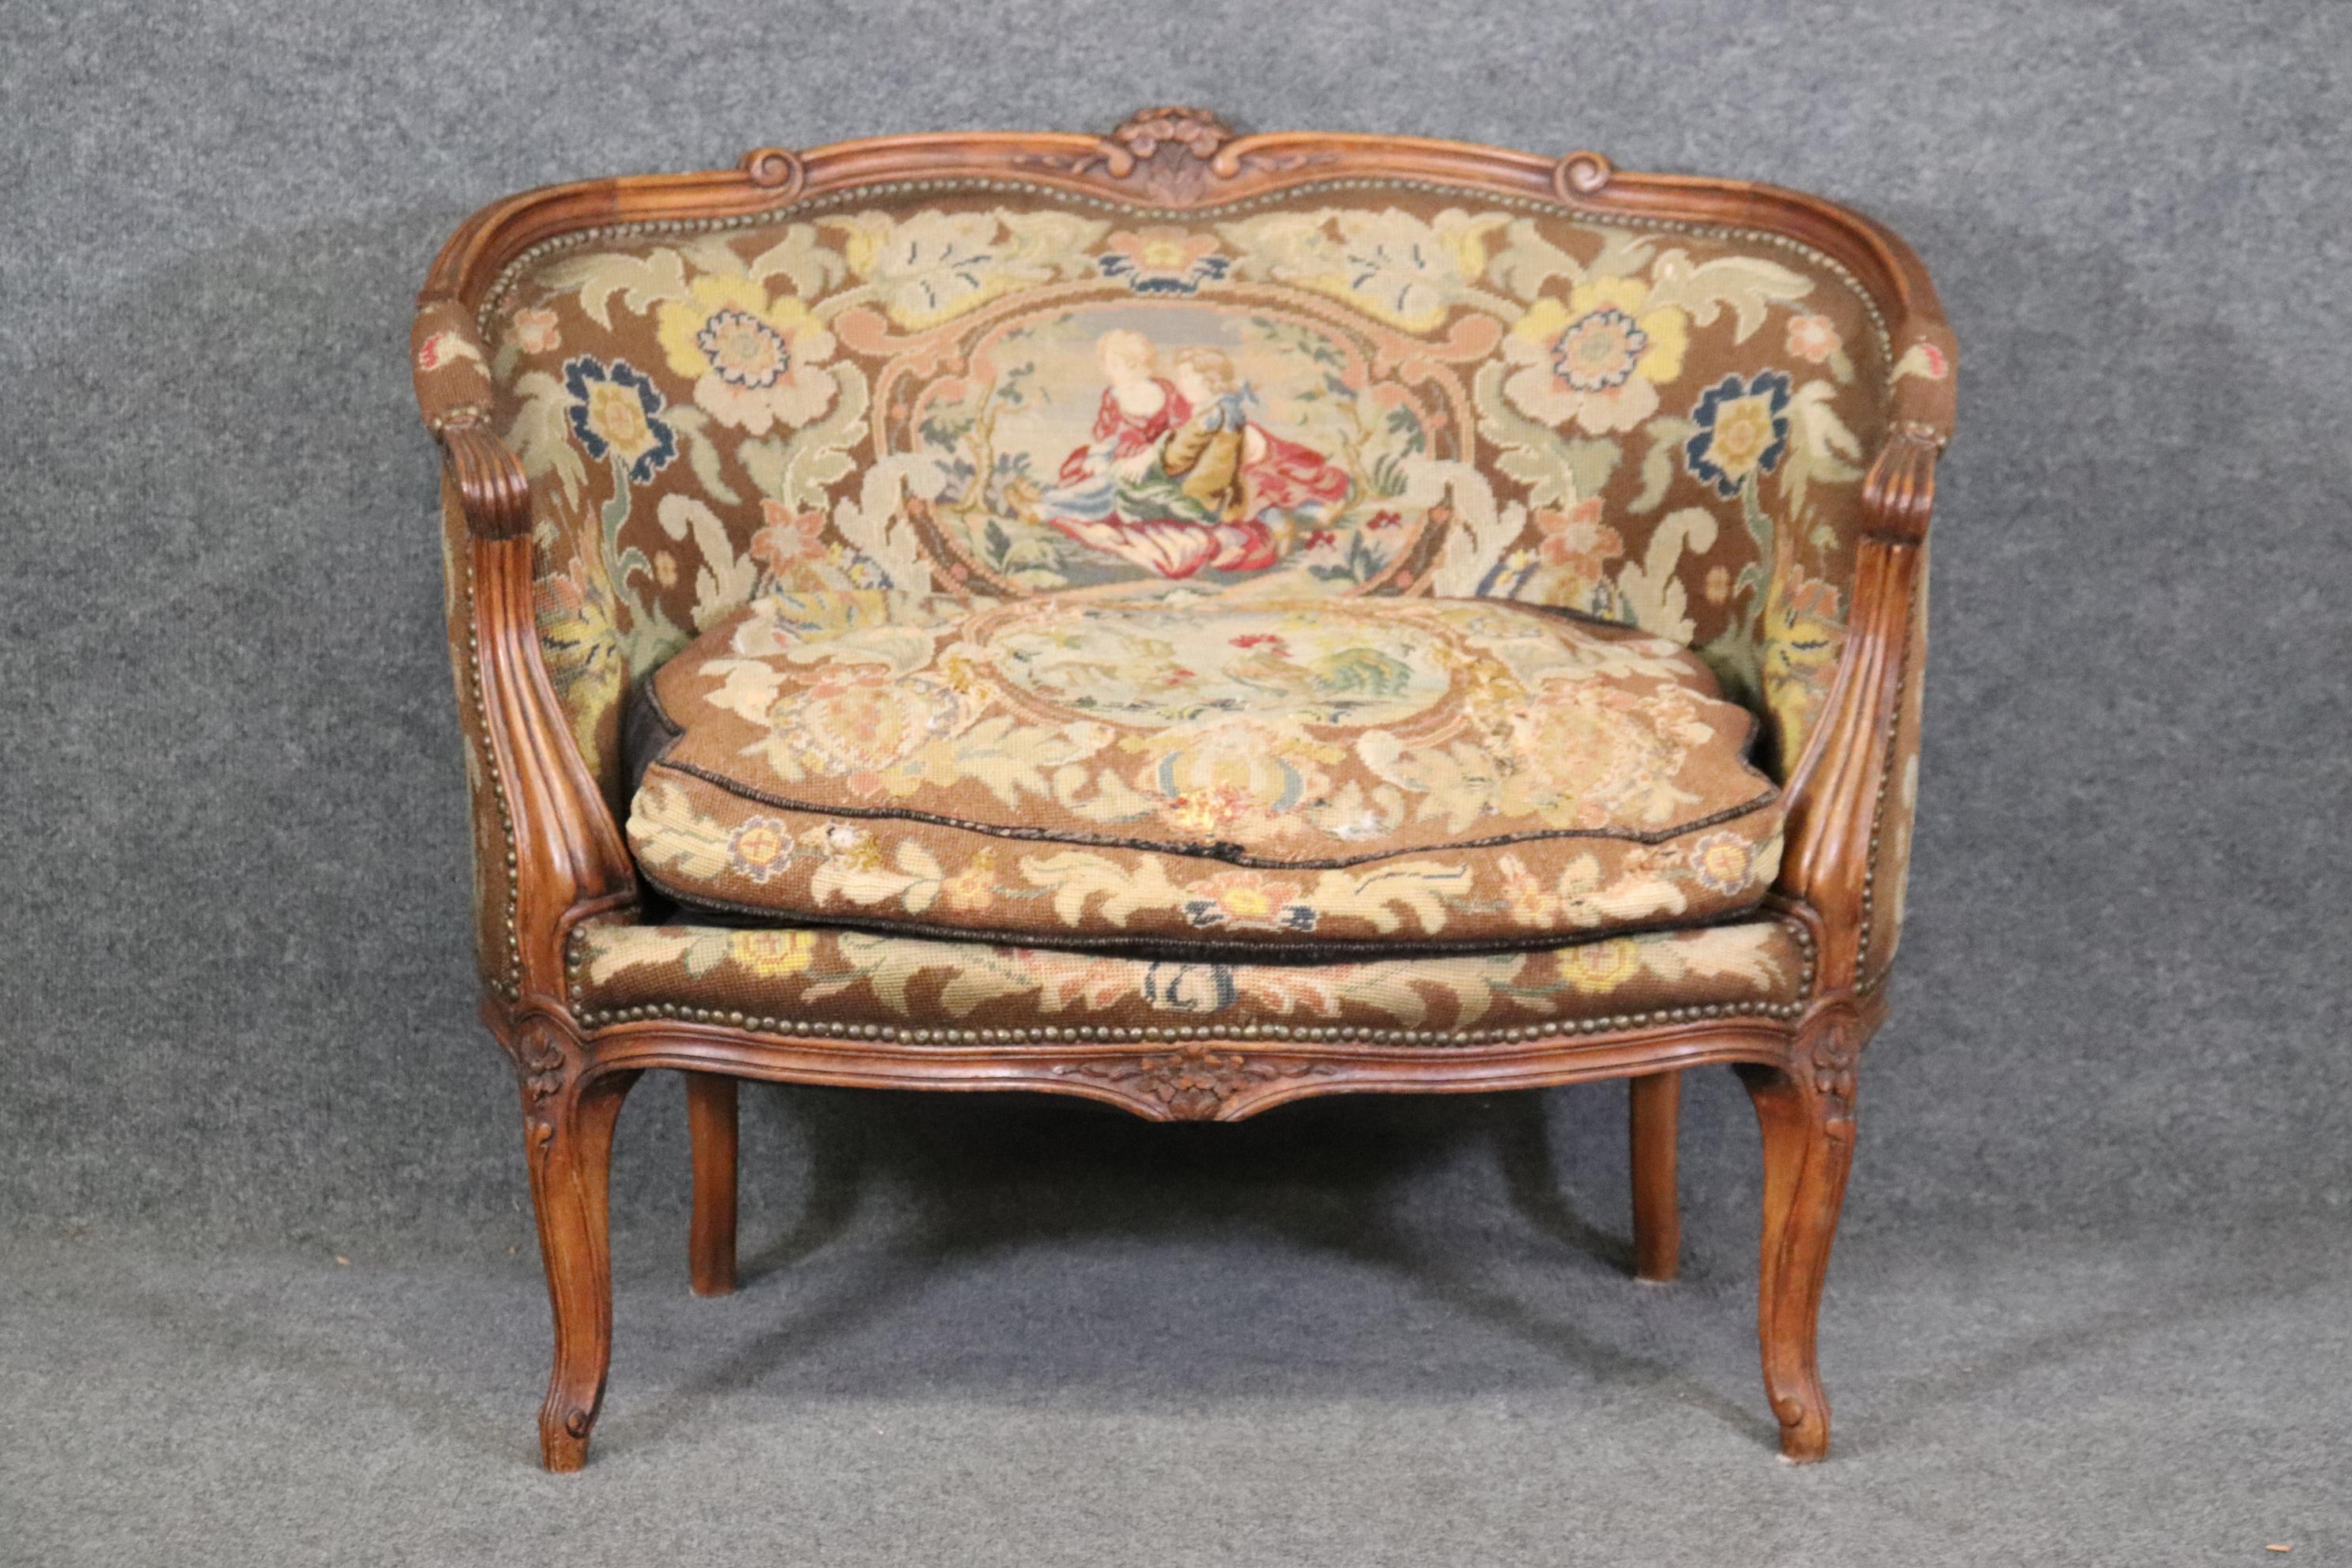 This is a charming needlepoint upholstered canape or marquis. The small size of 40.25 wide x 26.75 deep x 32.75 tall and a seat height of 20 inches makes it a wider chair, rather than a settee. The upholstery is original so expect small frays, wear